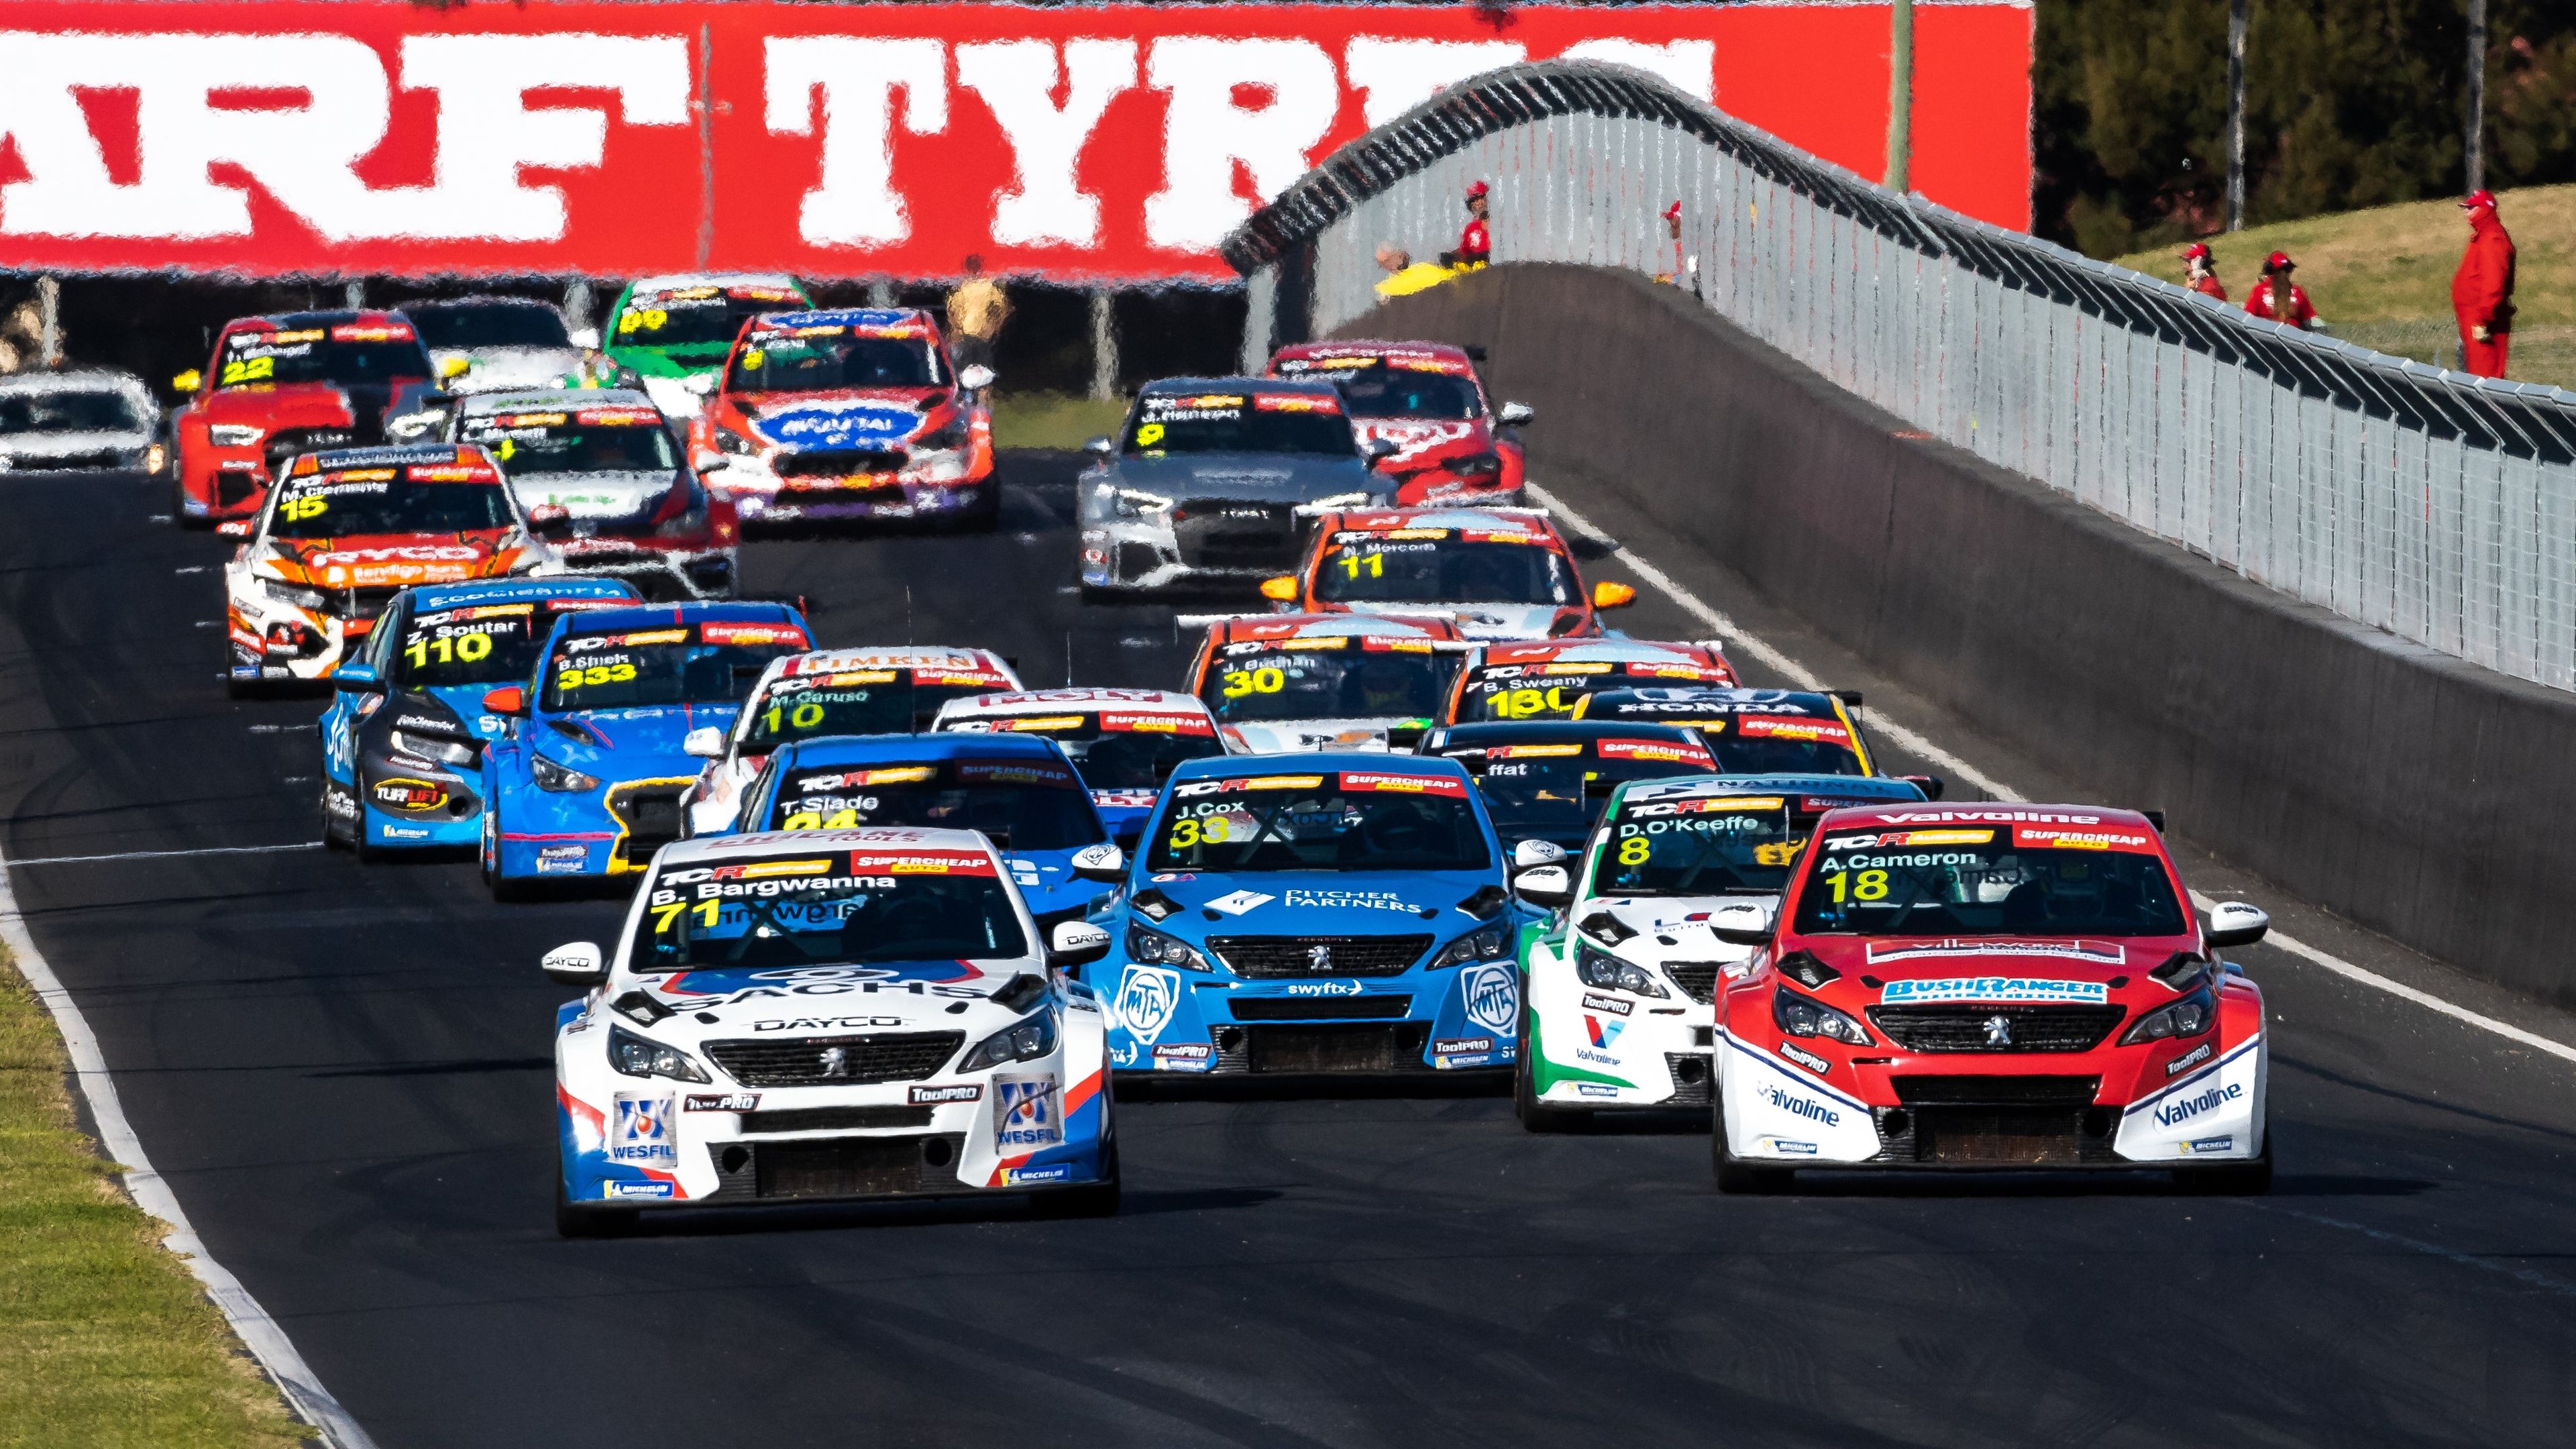 The TCR Australia Series races twice annually at Mount Panorama.